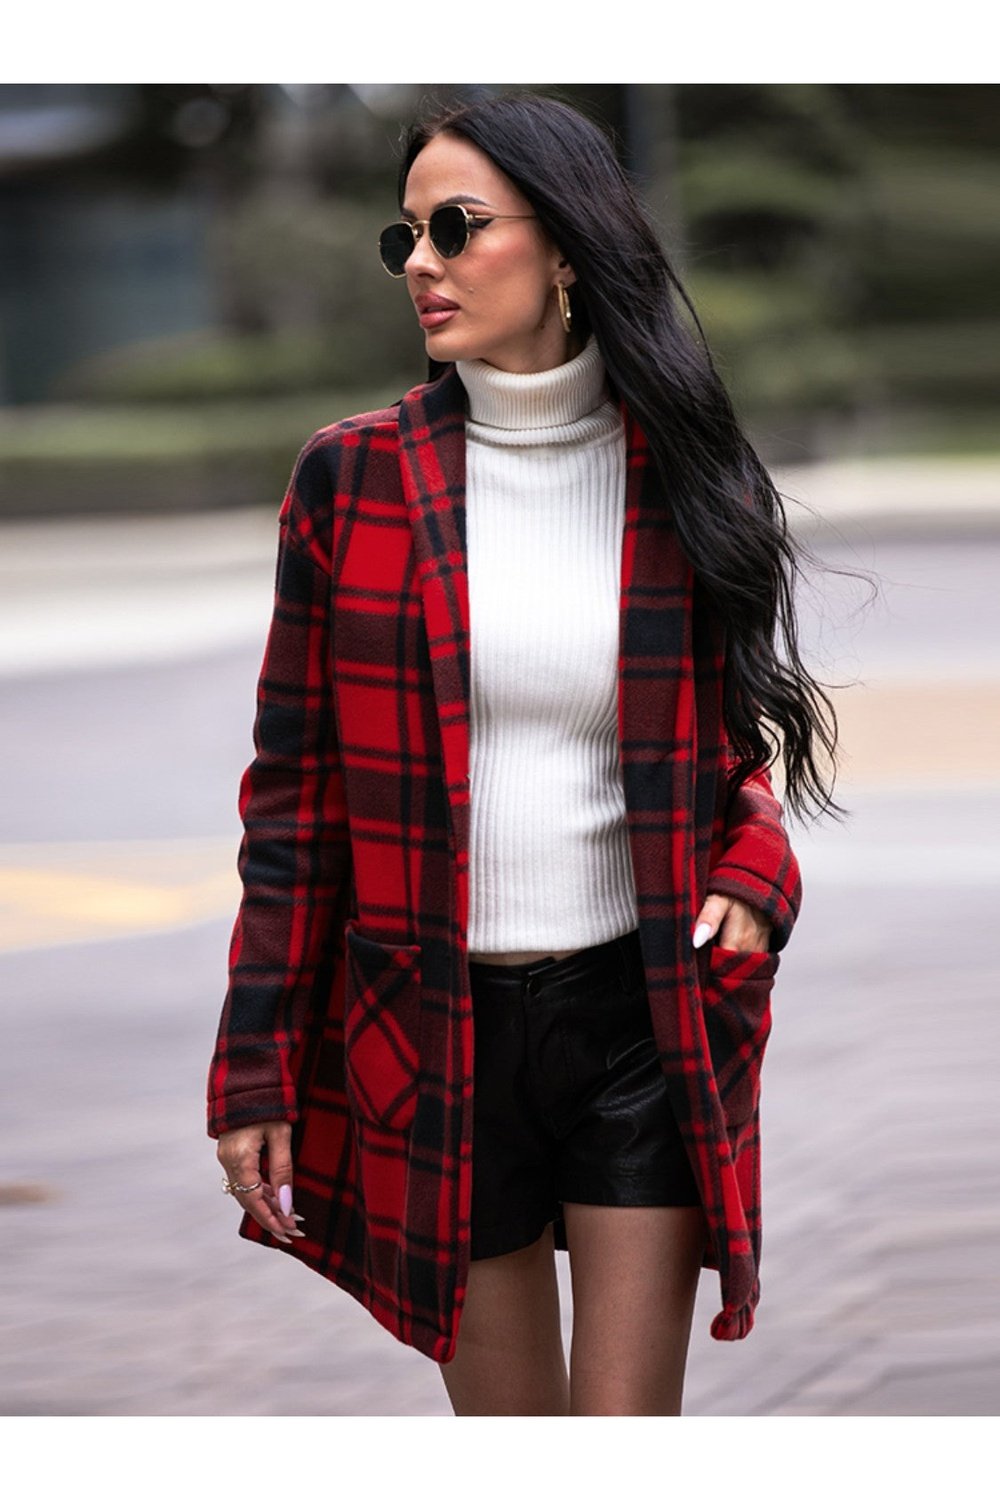 Plaid Shawl Collar Coat with Pockets - Jackets - FITGGINS